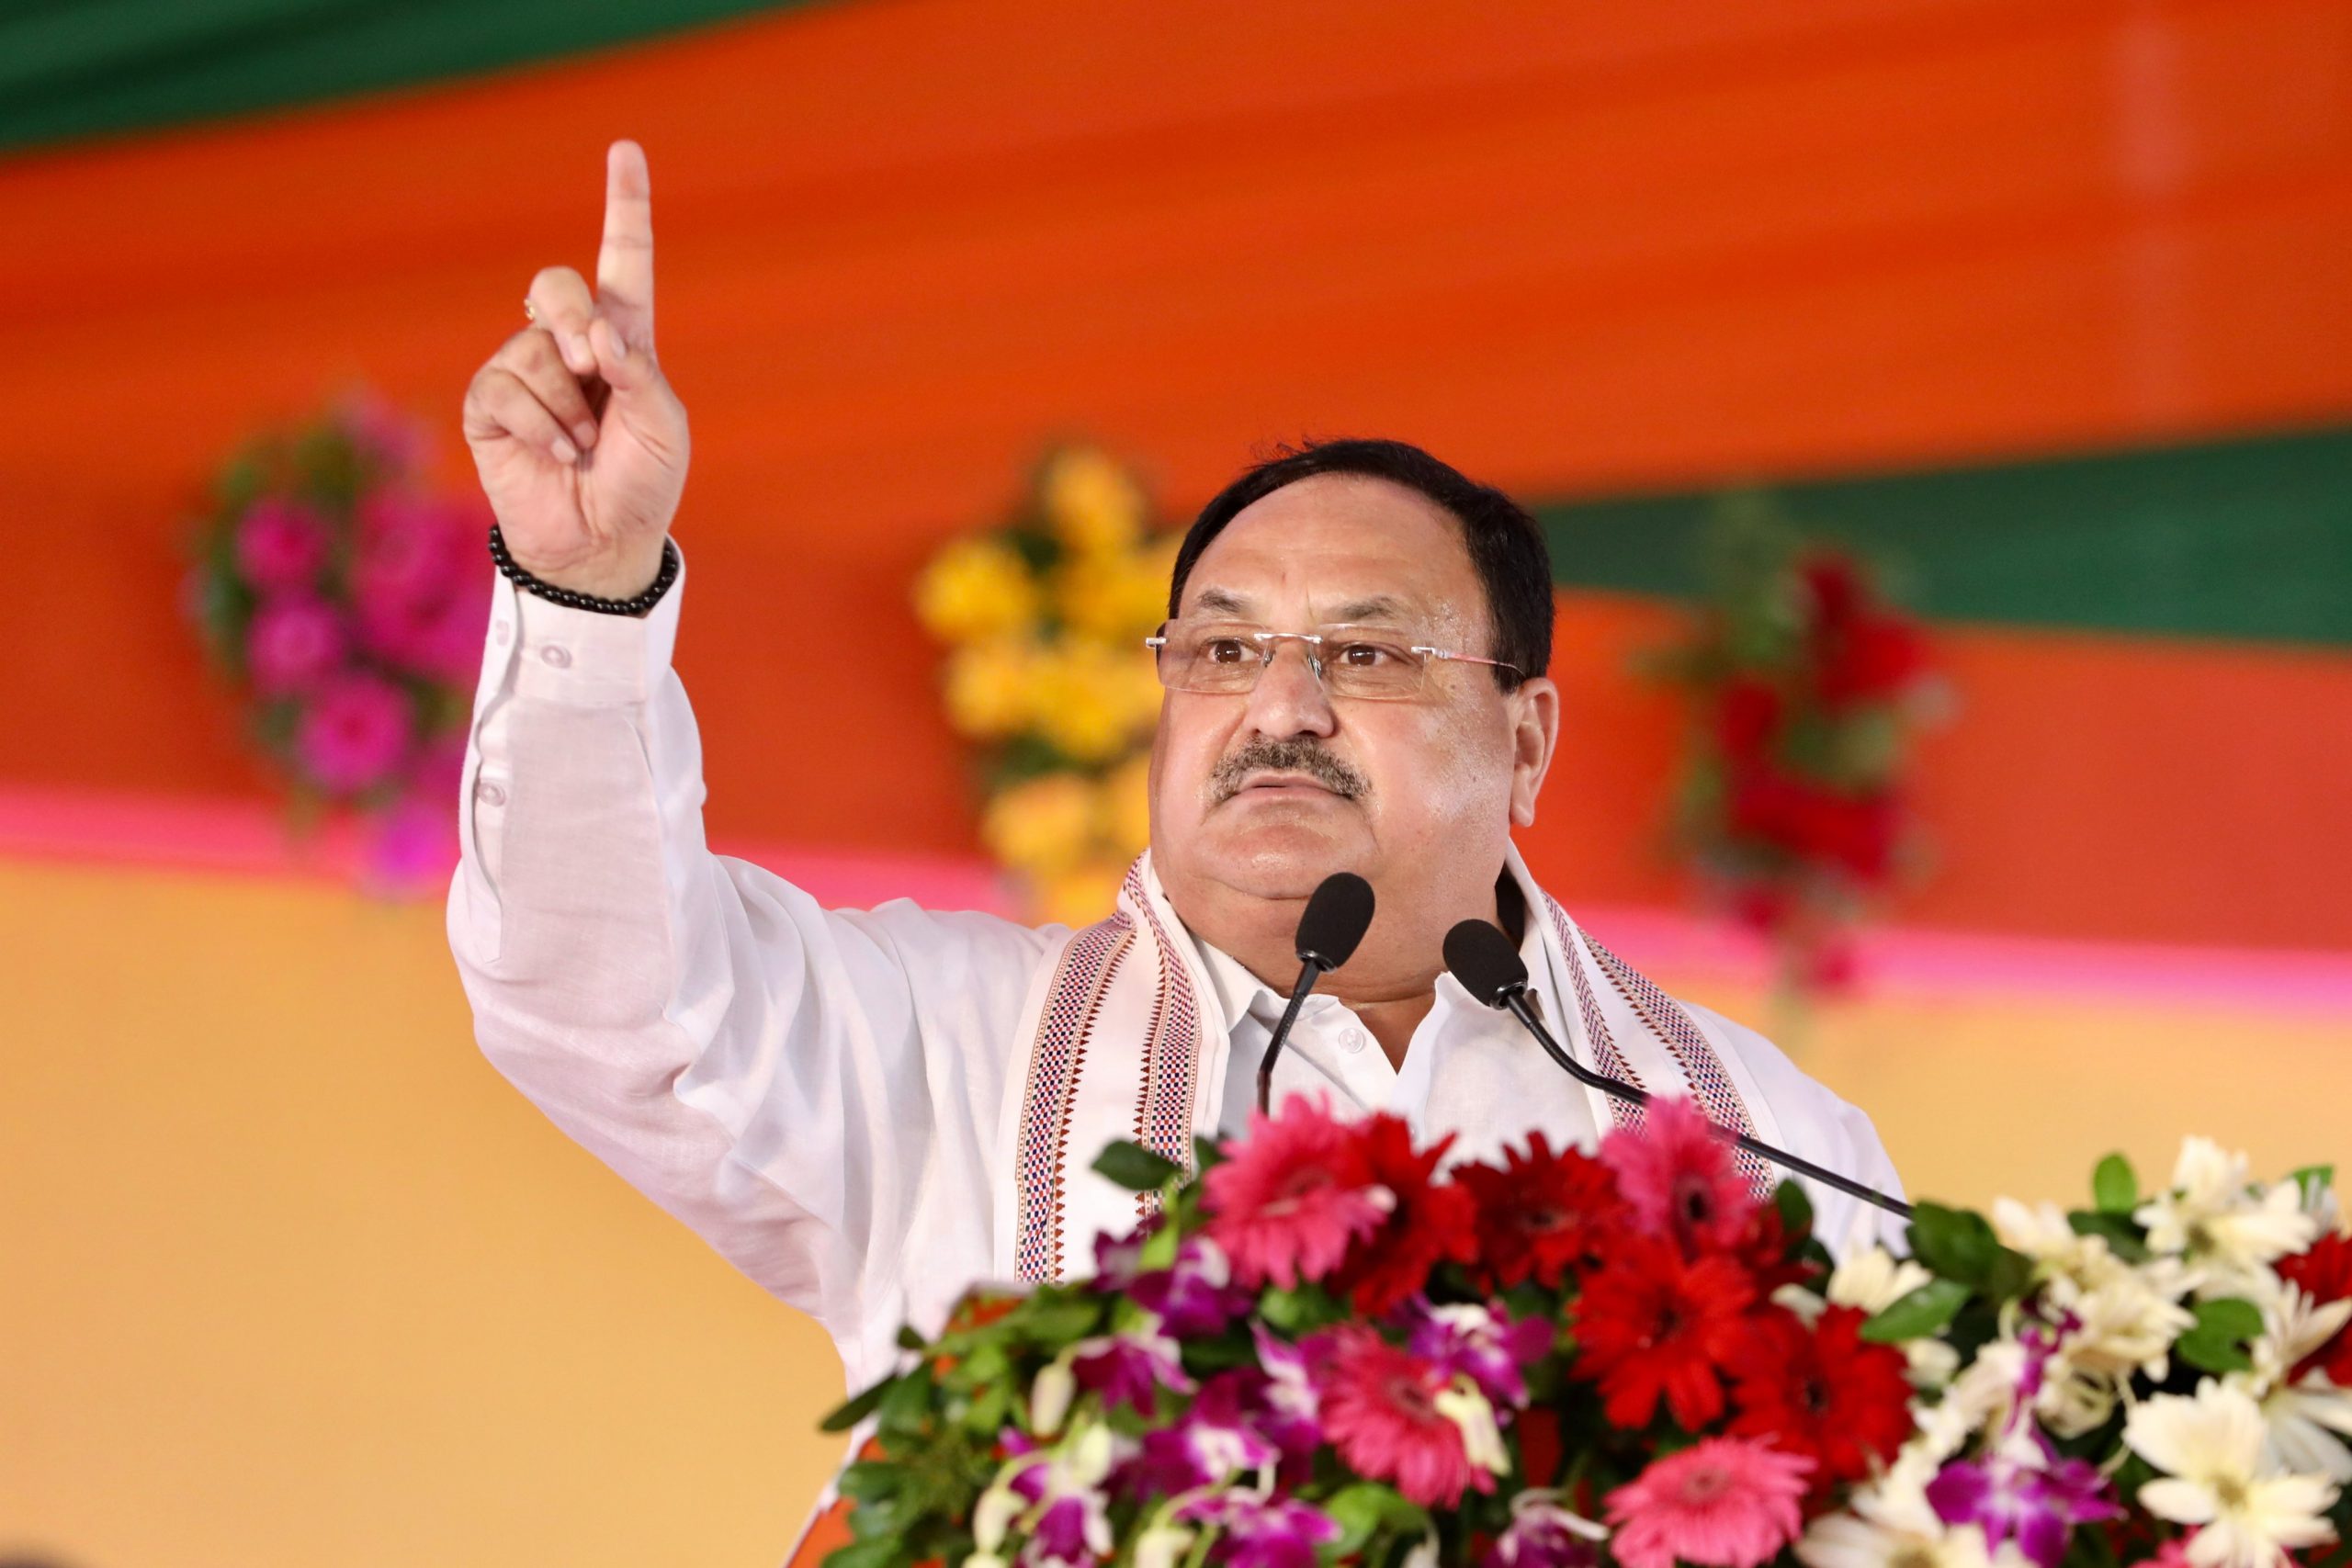 Cong not able to digest PM’s global acclamation: Nadda